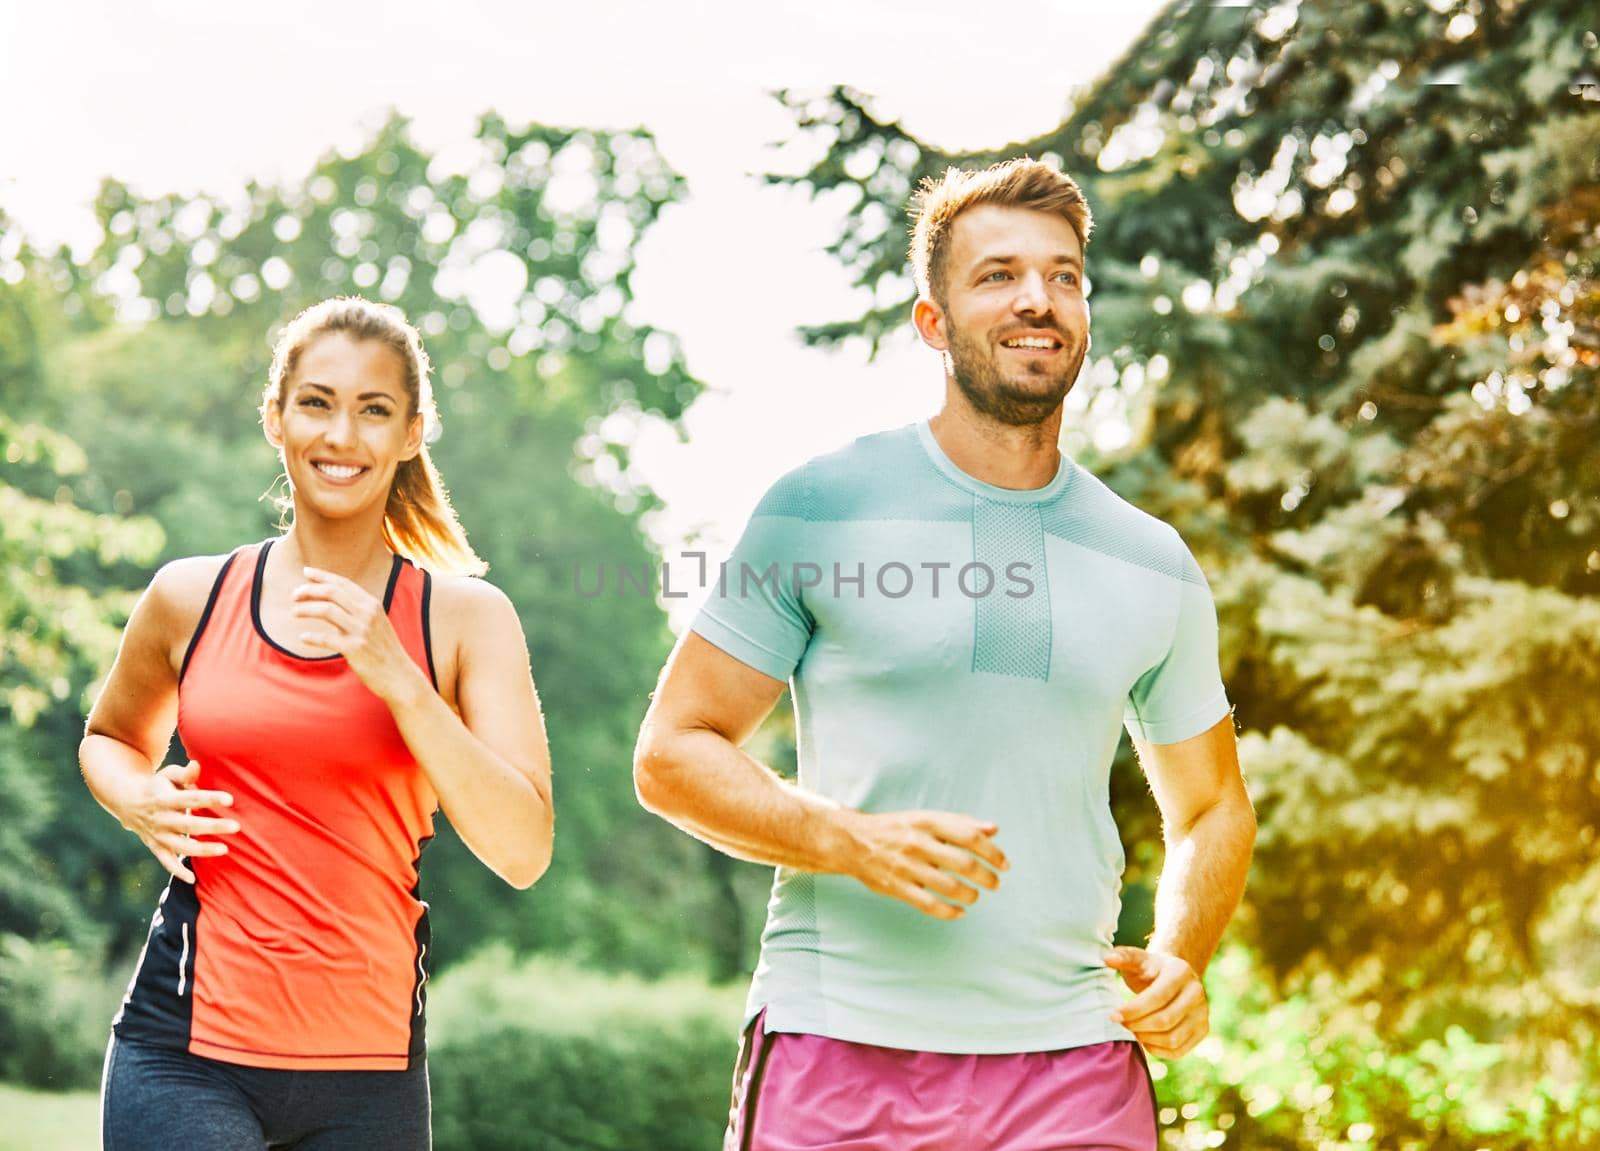 fitness woman park exercise lifestyle outdoor sport healthy couple nature active young fit training athlete man by Picsfive